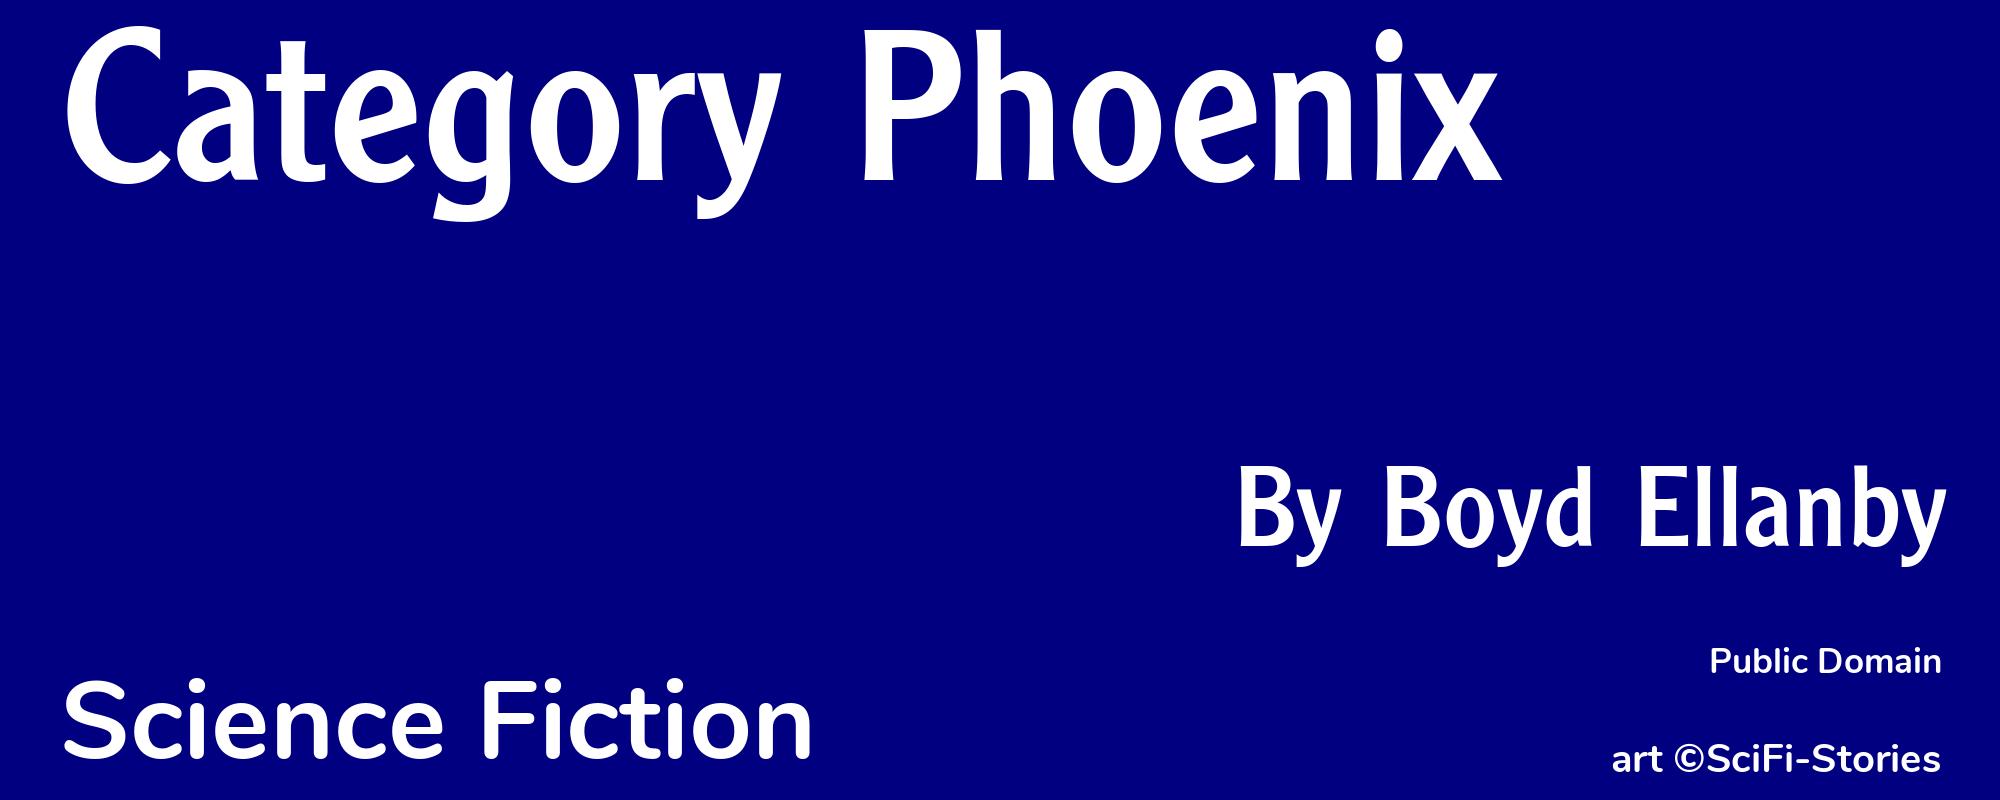 Category Phoenix - Cover